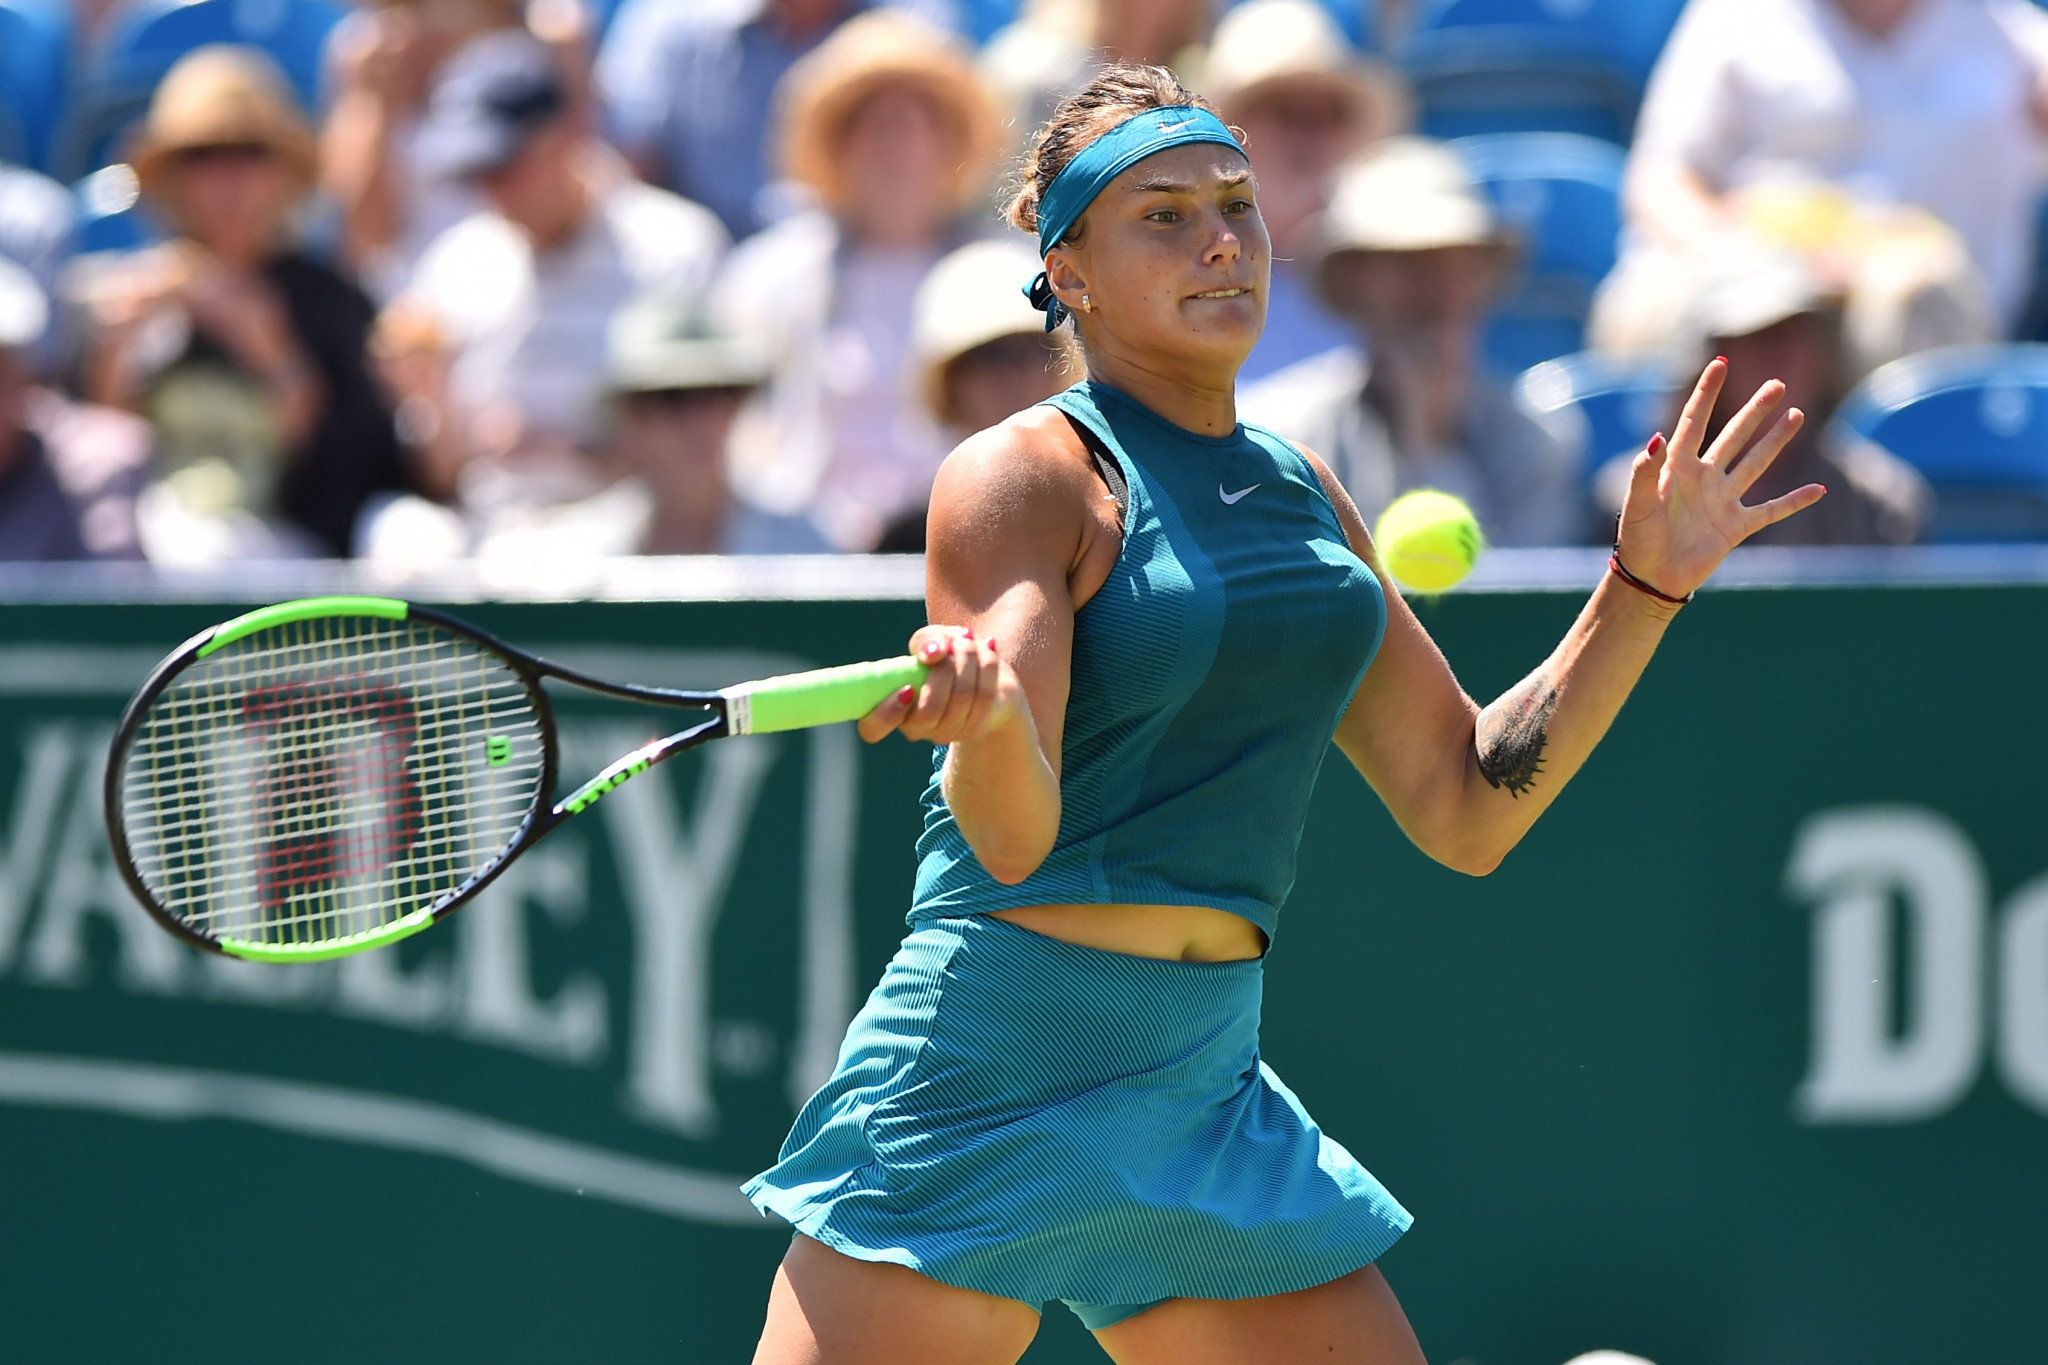 Belarusian Aryna Sabalenka earned her first victory over a player in the world's top 10 as she stunned defending champion and second seed Karolína Plíšková ©Getty Images